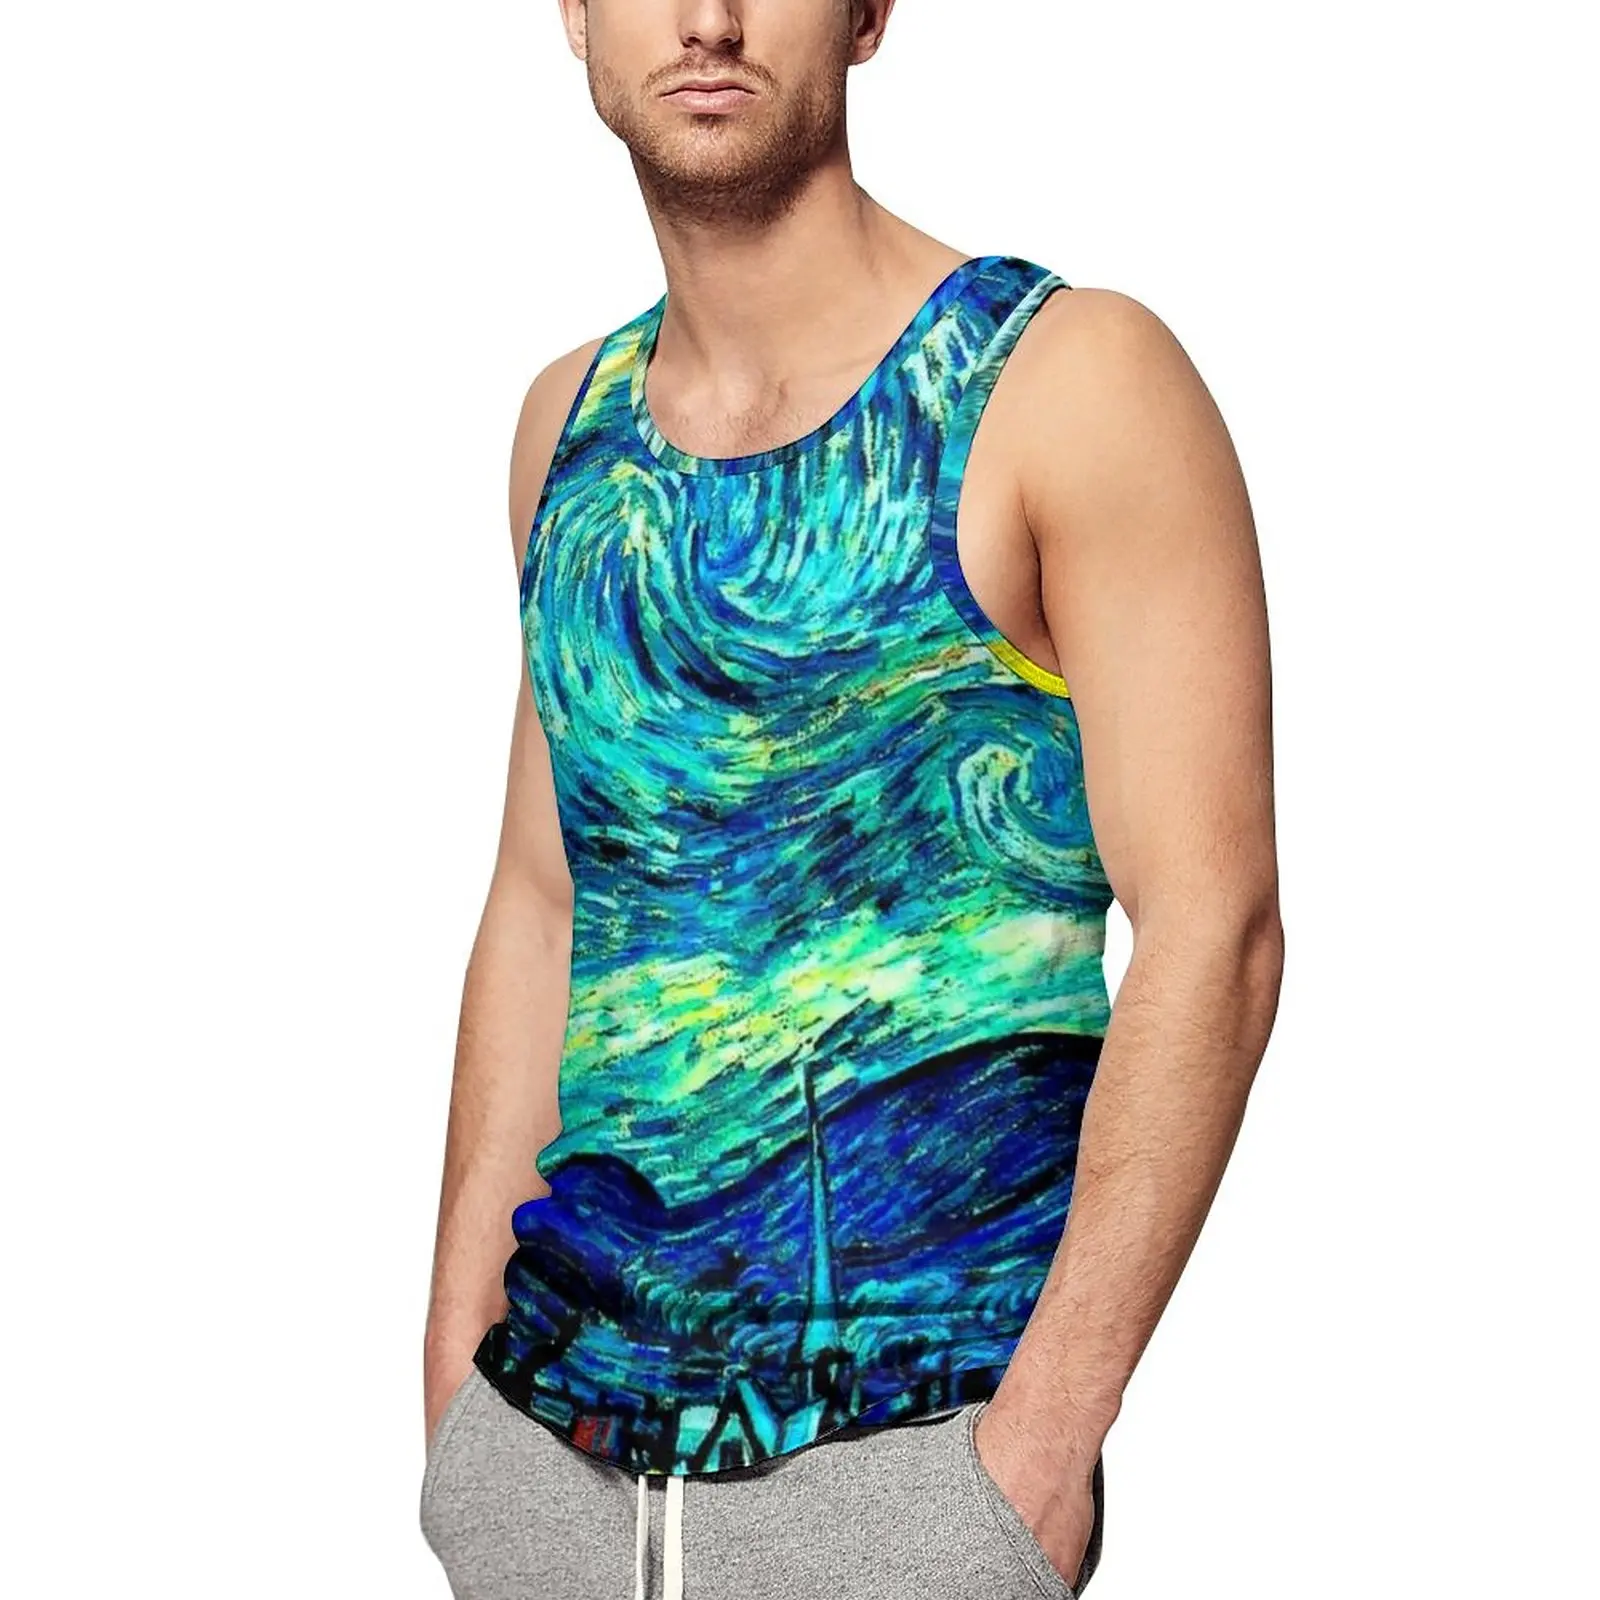 

Mountains Famous Painting Tank Top Starry Night Vincent Van Gogh Cool Tops Summer Training Man Print Sleeveless Shirts Big Size